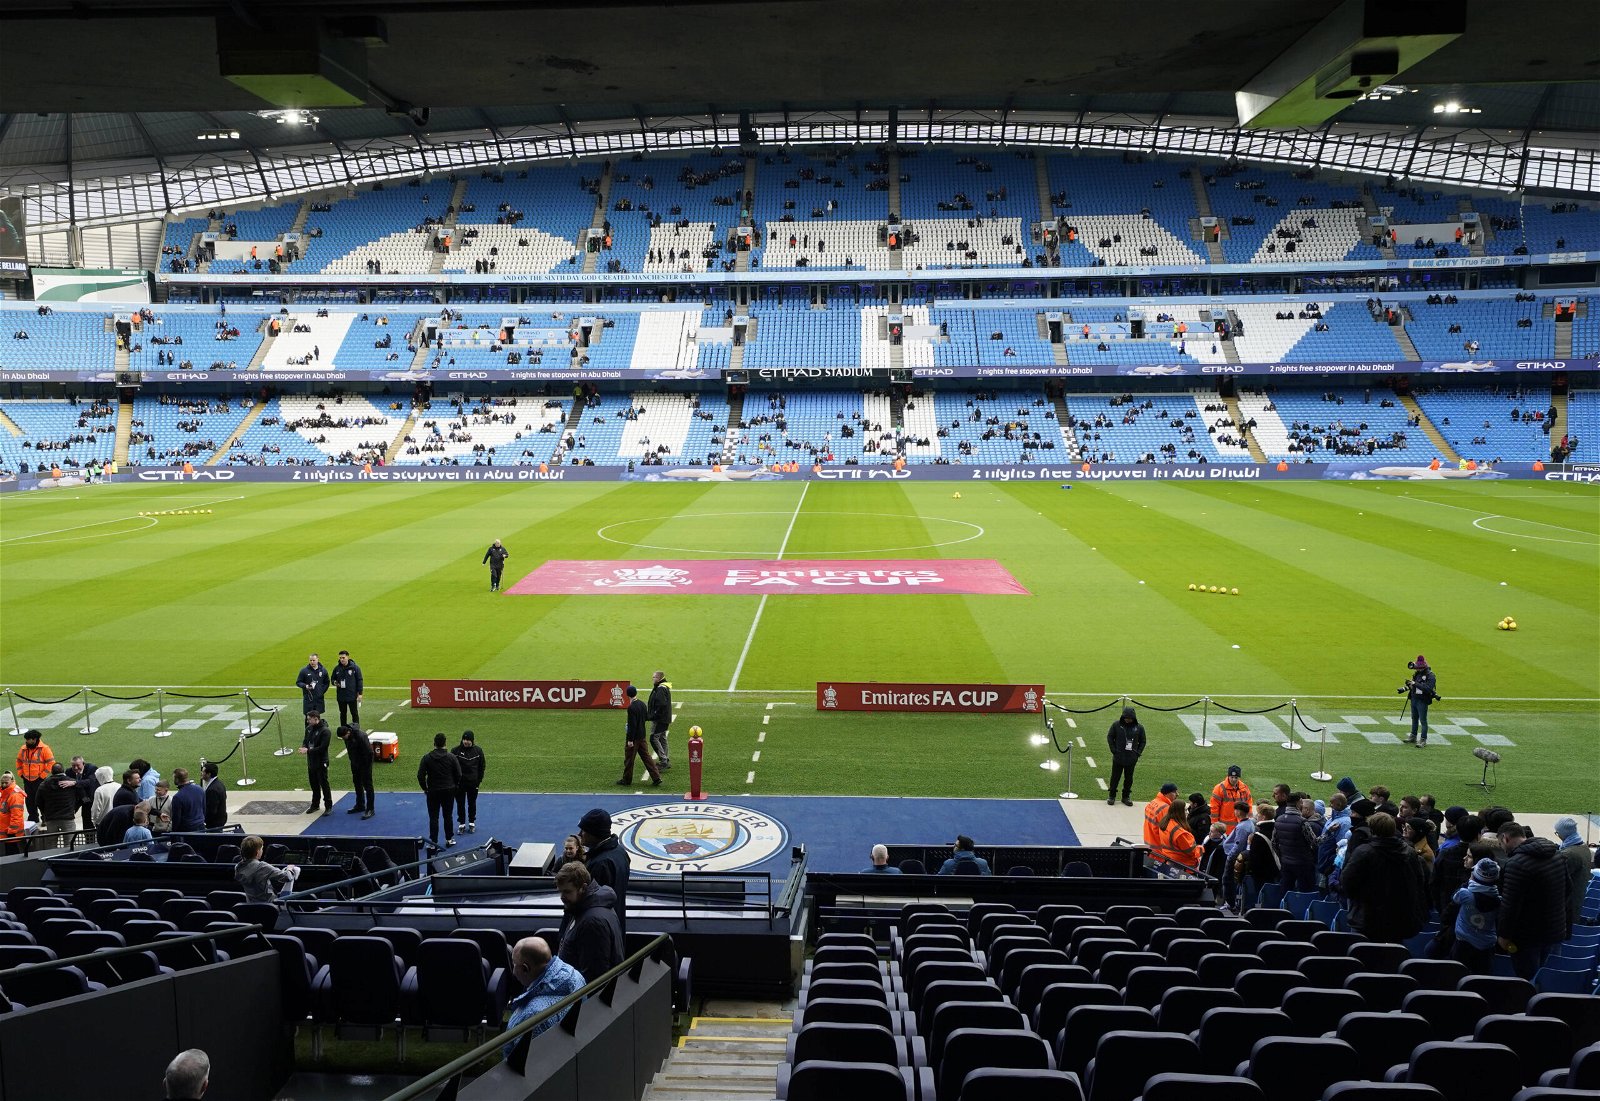 Manchester City's Ethiad Stadium could be an option to host the Grand Final